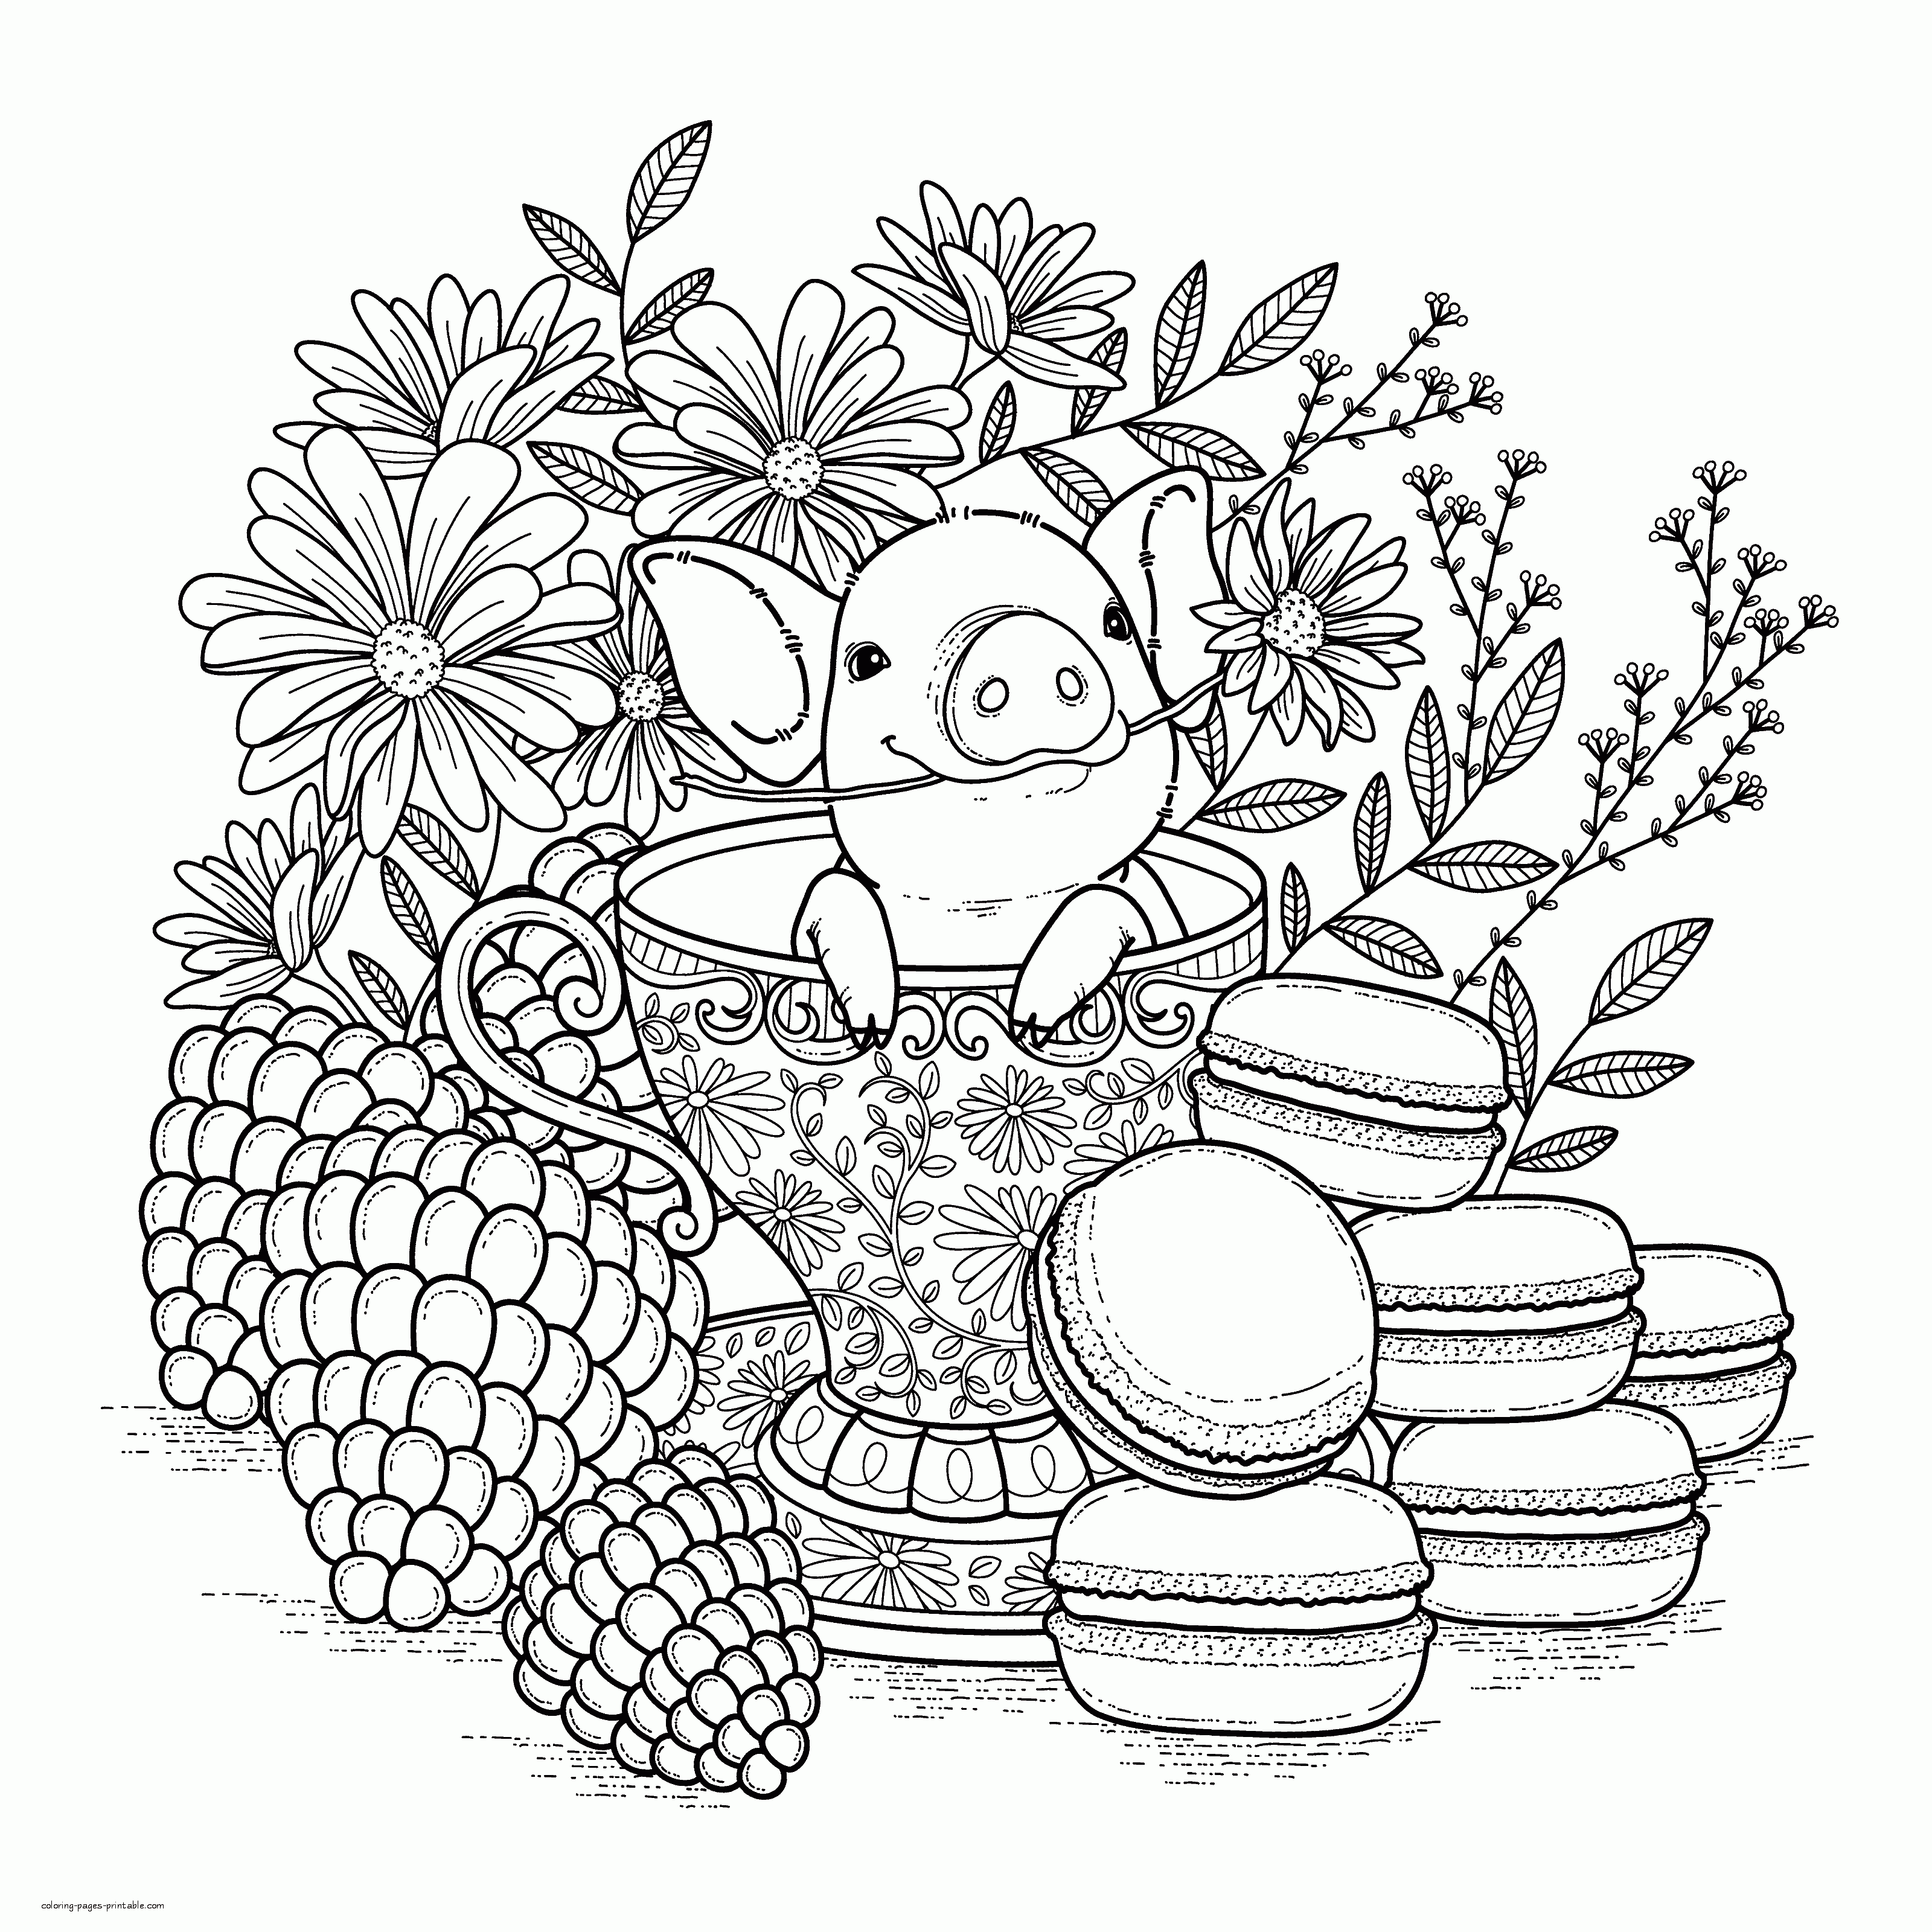 New Adult Coloring Pages. A Pig || COLORING-PAGES-PRINTABLE.COM